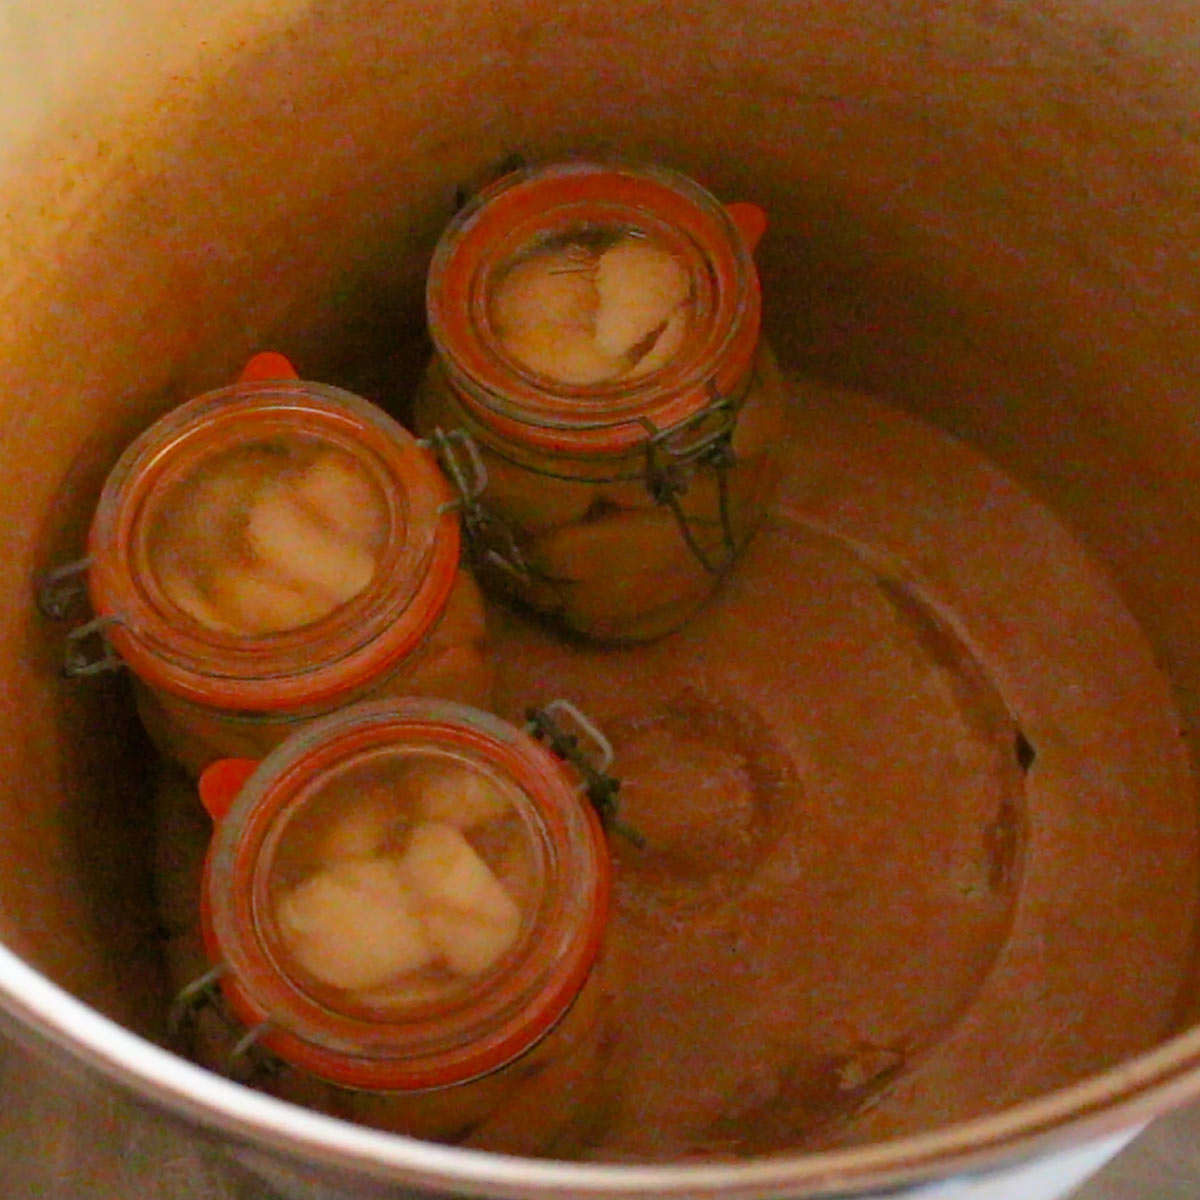 jars in a water bath canner